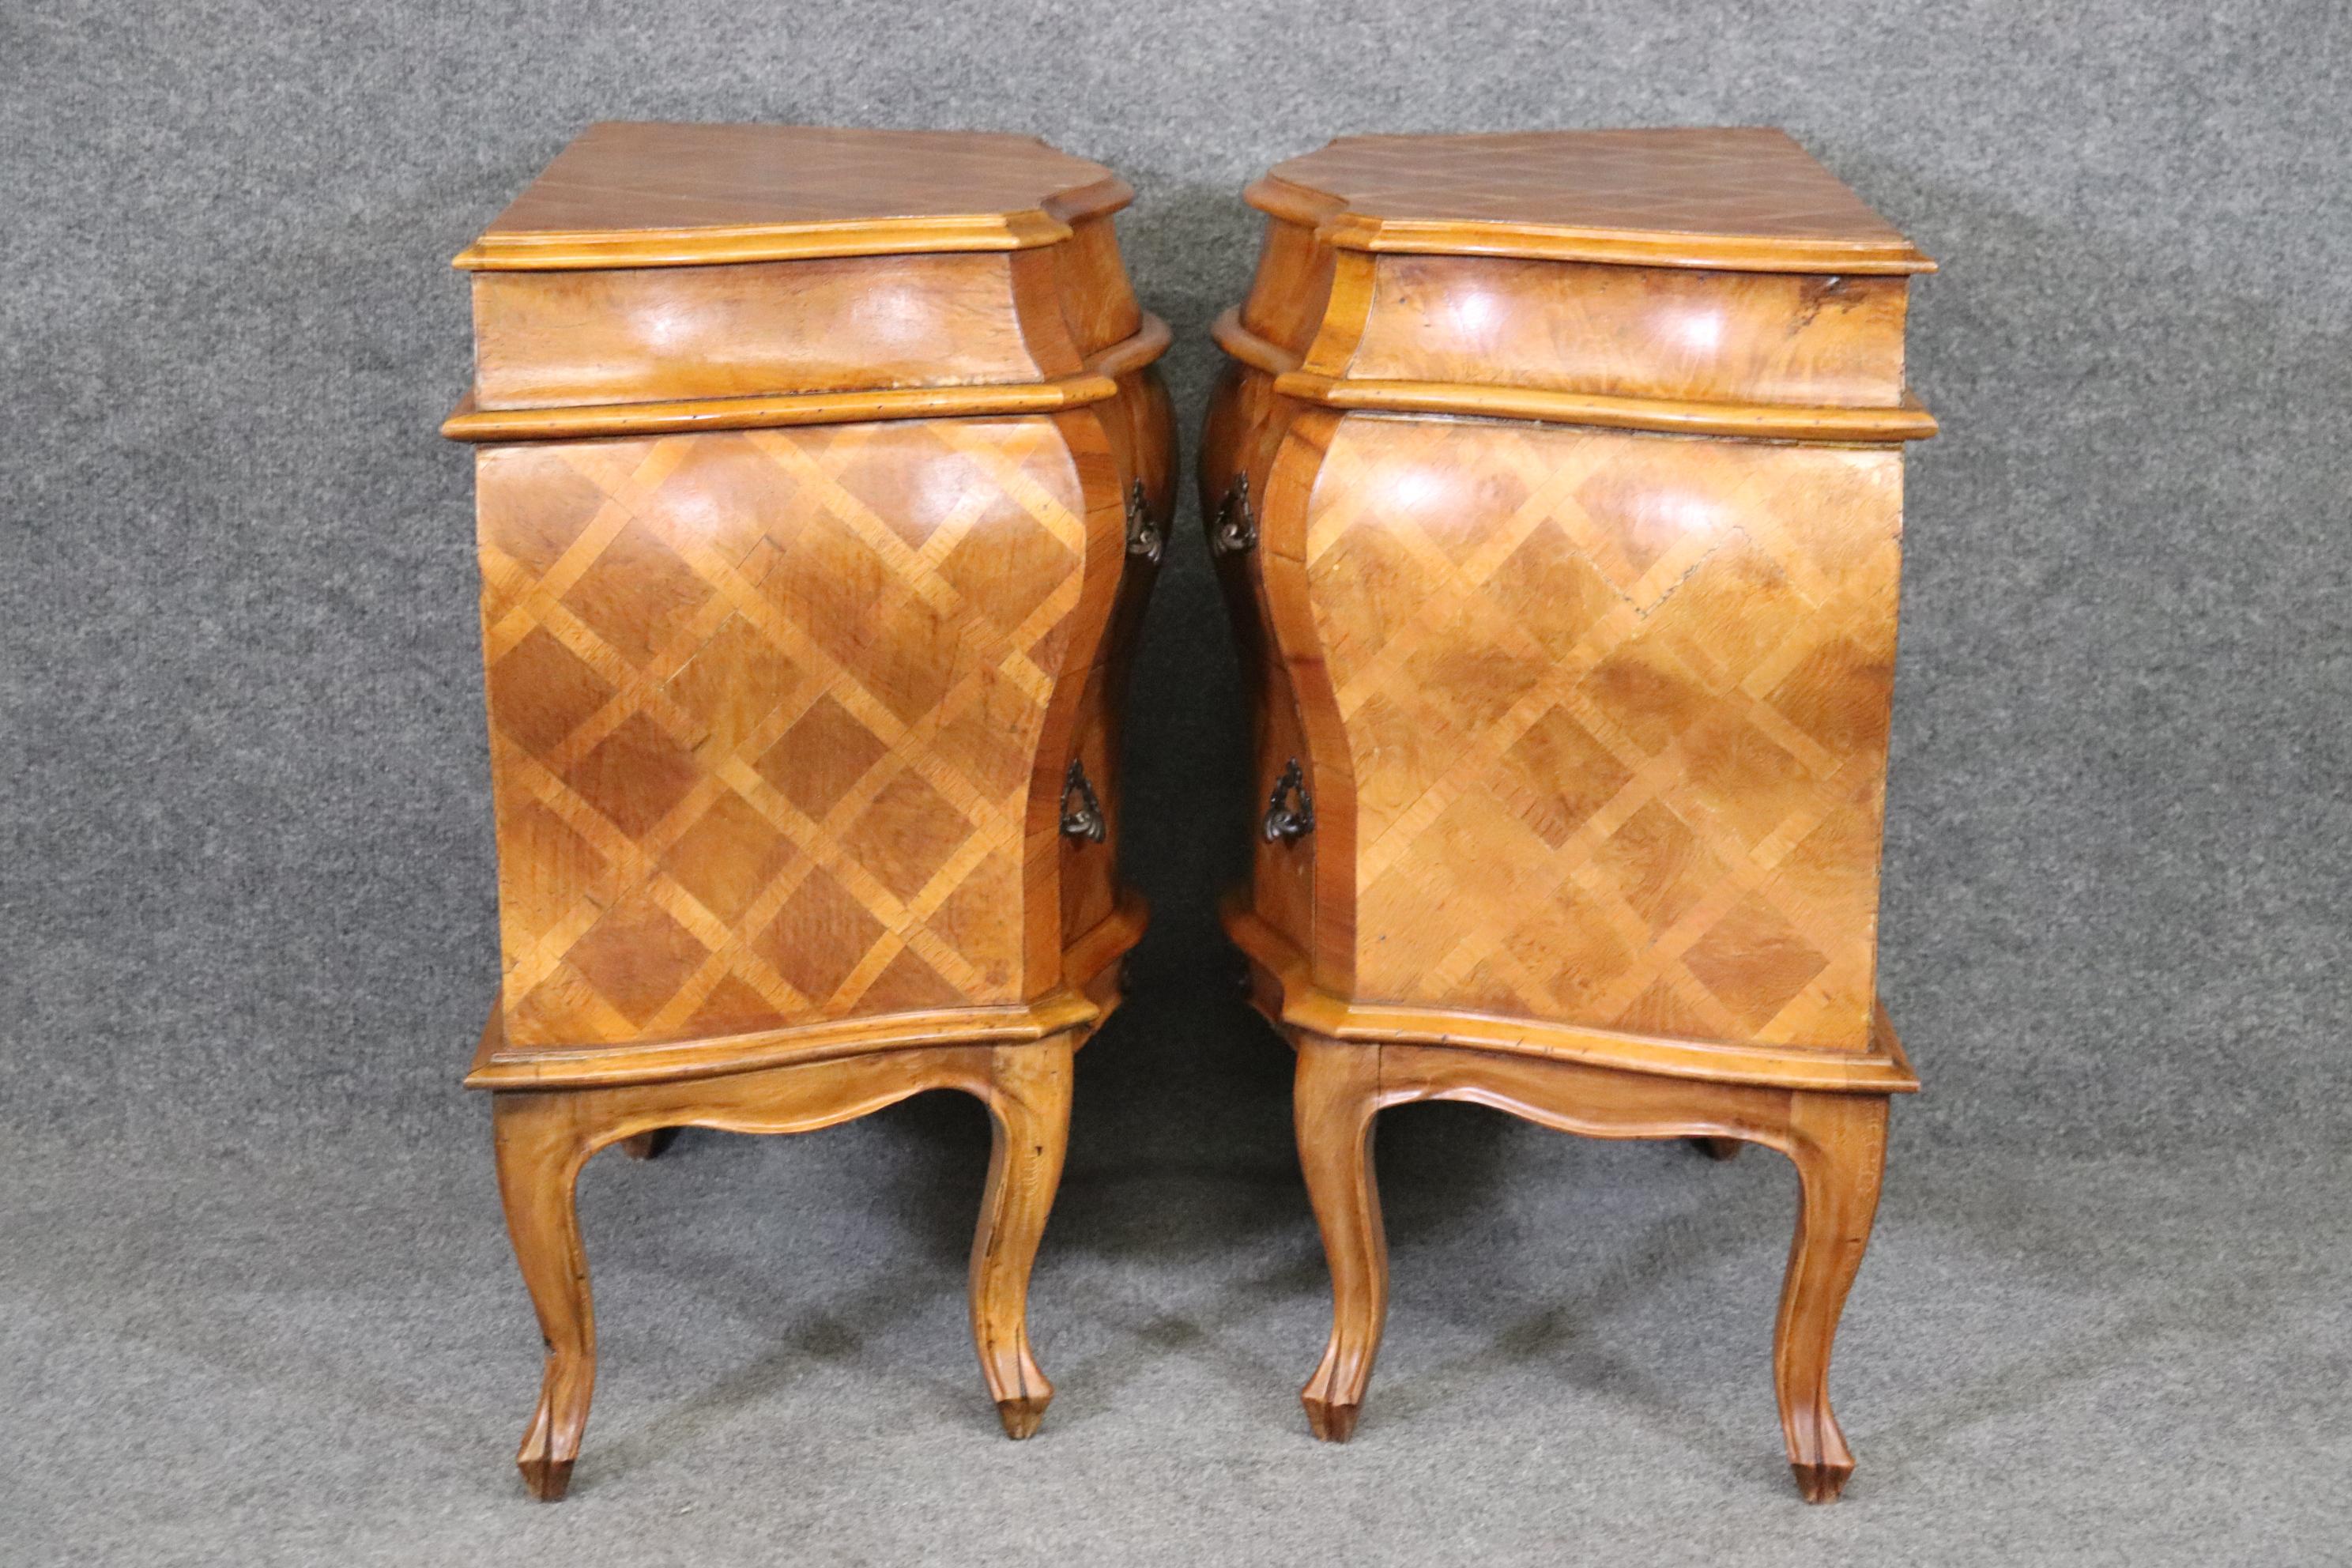 Pair of Cross-Hatch Inlaid Olivewood Italian Bombe Nightstands Endtables 1